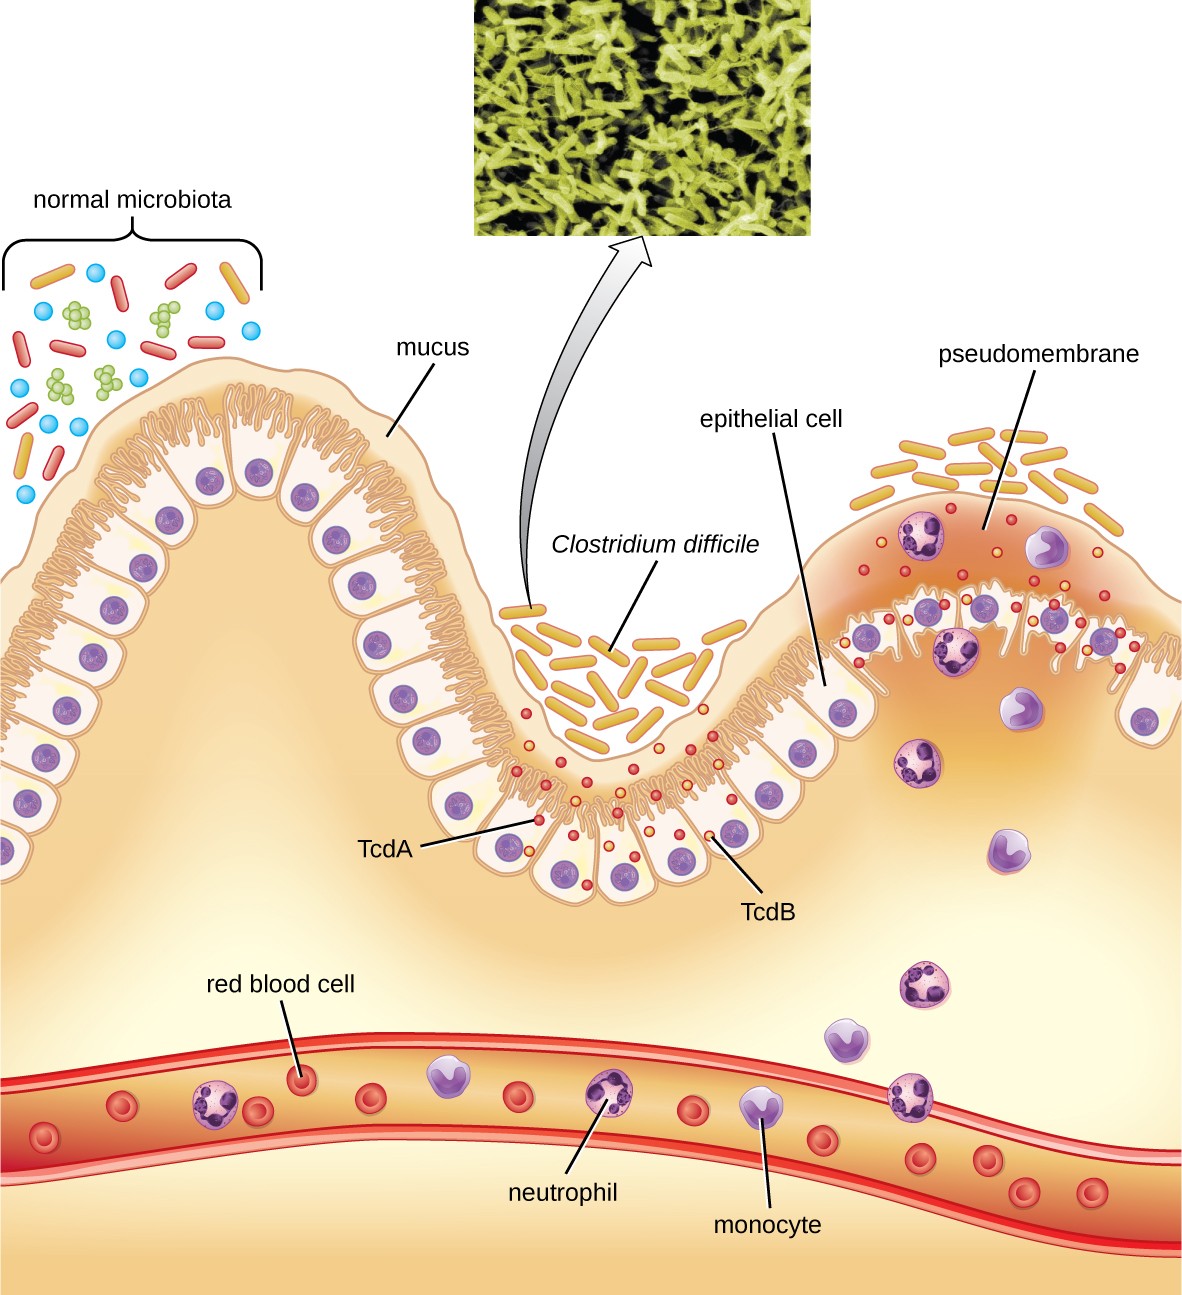 A diagram showing the lining of the stomach. At the very bottom is a blood vessel with red blood cells, neutrophils, and monocytes. At the top is a wavy layer of epithelial cells covered in mucous. A variety of bacteria (different shapes and colors to indicate different species) are seen on the mucus. In one region is a cluster of rod shaped cells labeled Clostridium difficile that release small dots labeled TcdA and TcdB. These create a pseudomembrane that is a swelling above destroyed epithelial cells. In response neutrophils and monocytes released.